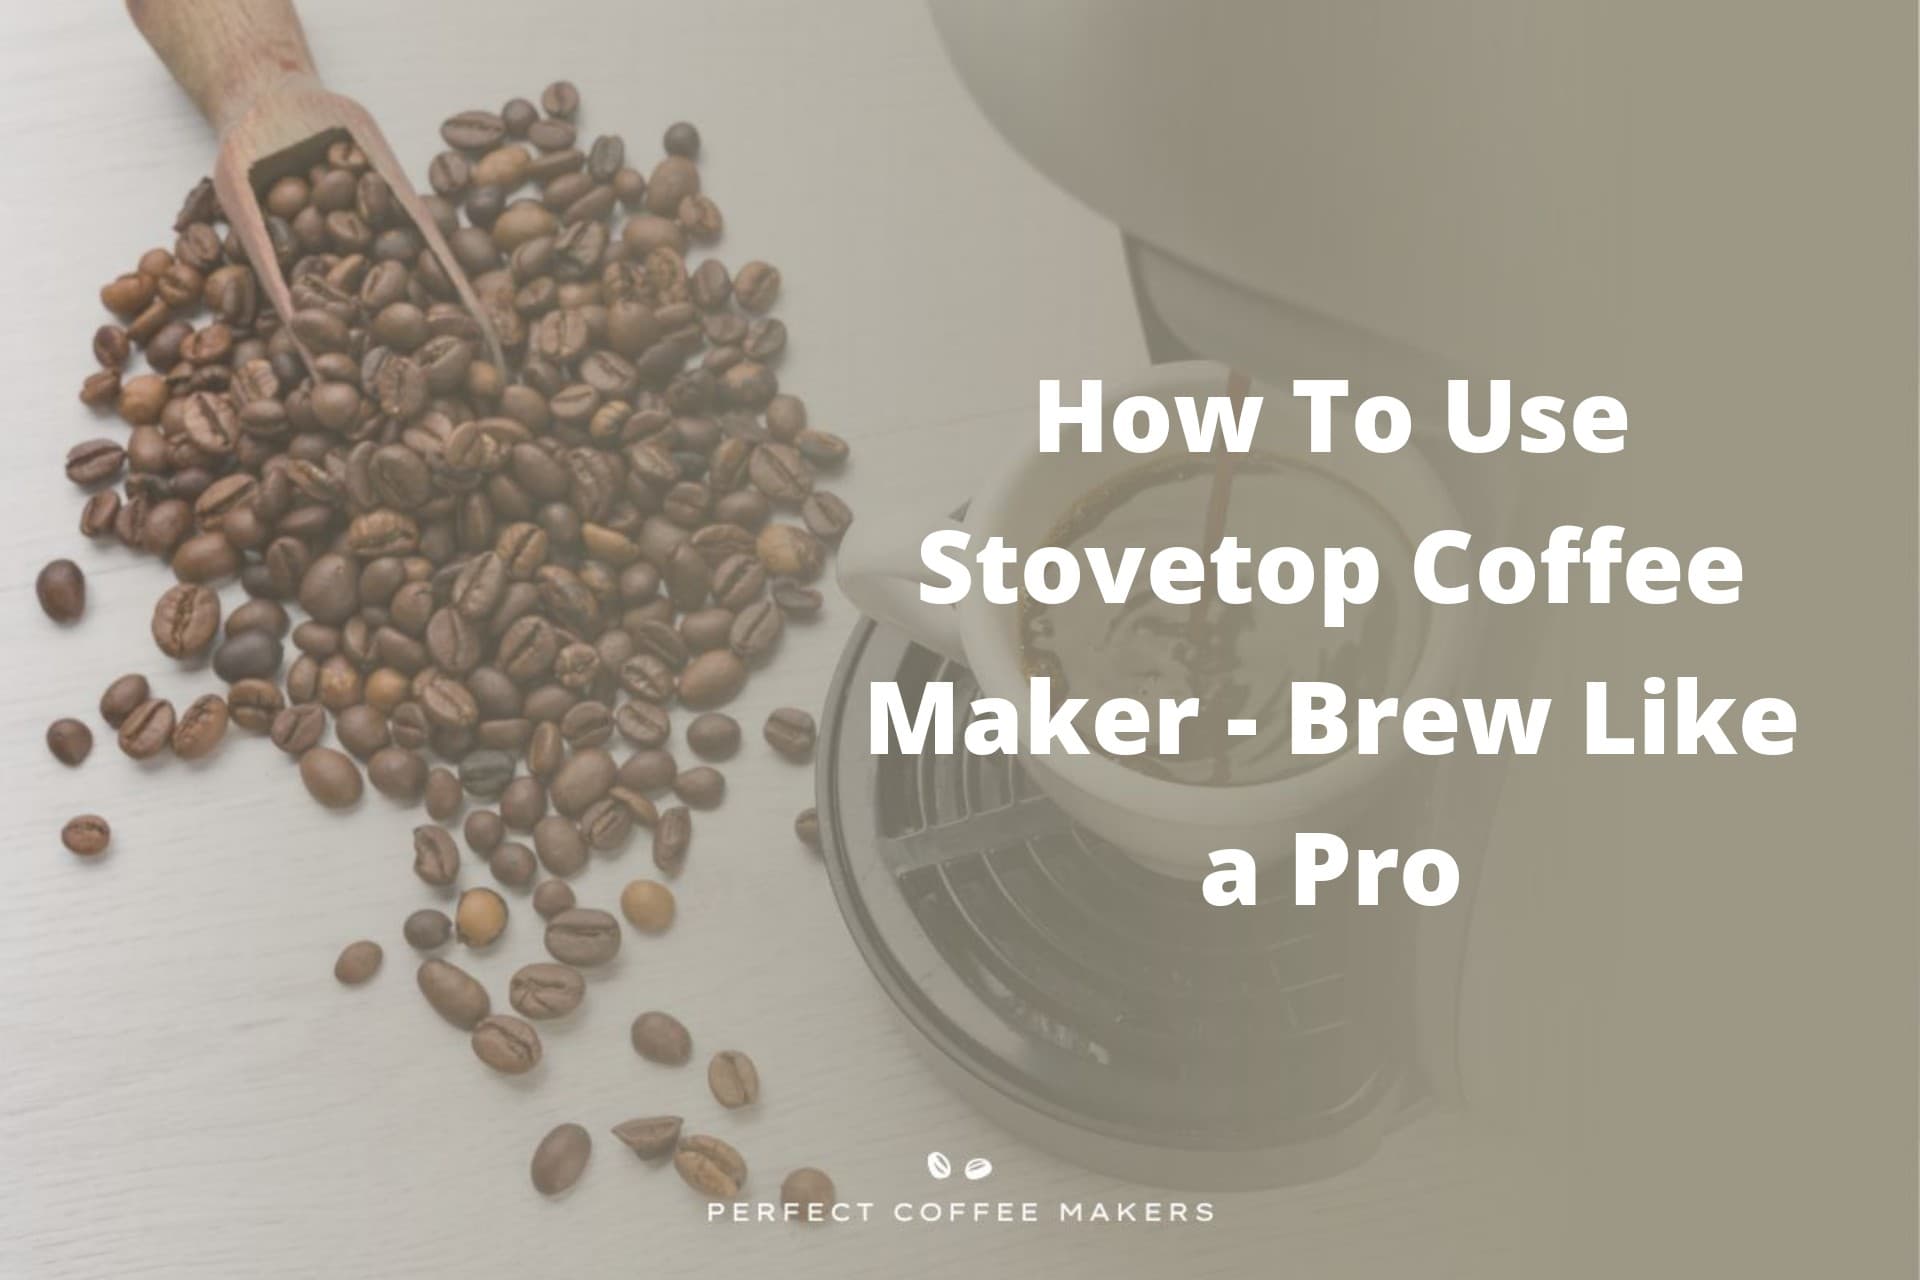 How To Use Stovetop Coffee Maker – Brew Like a Pro